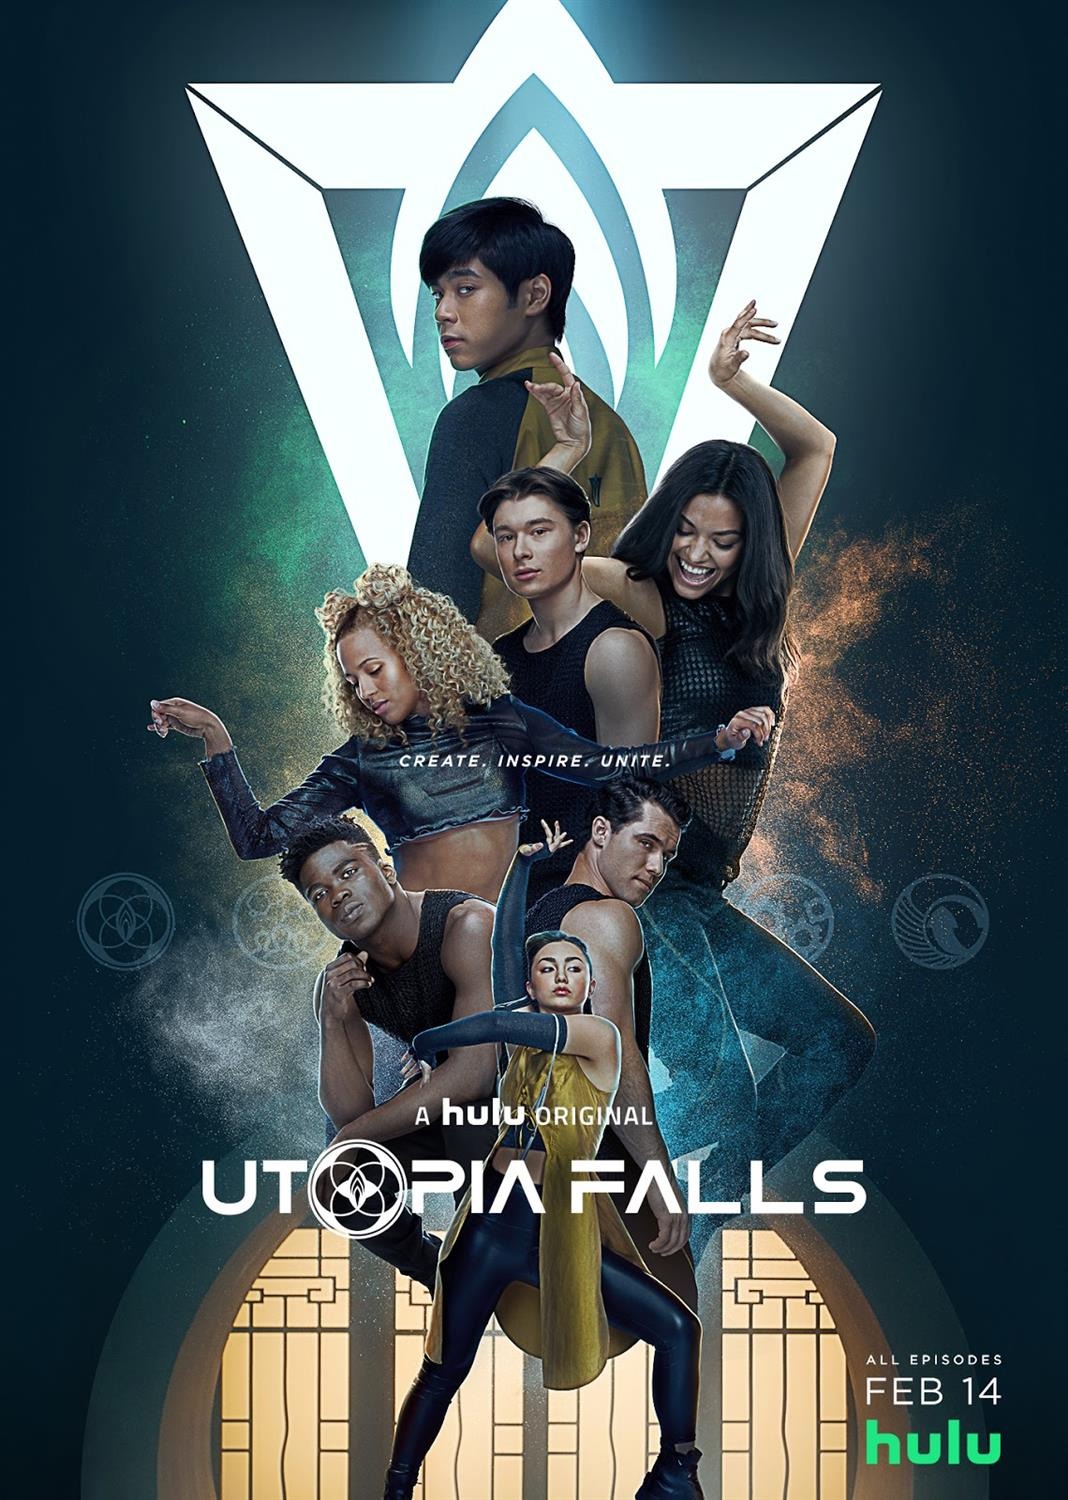 Extra Large TV Poster Image for Utopia Falls 